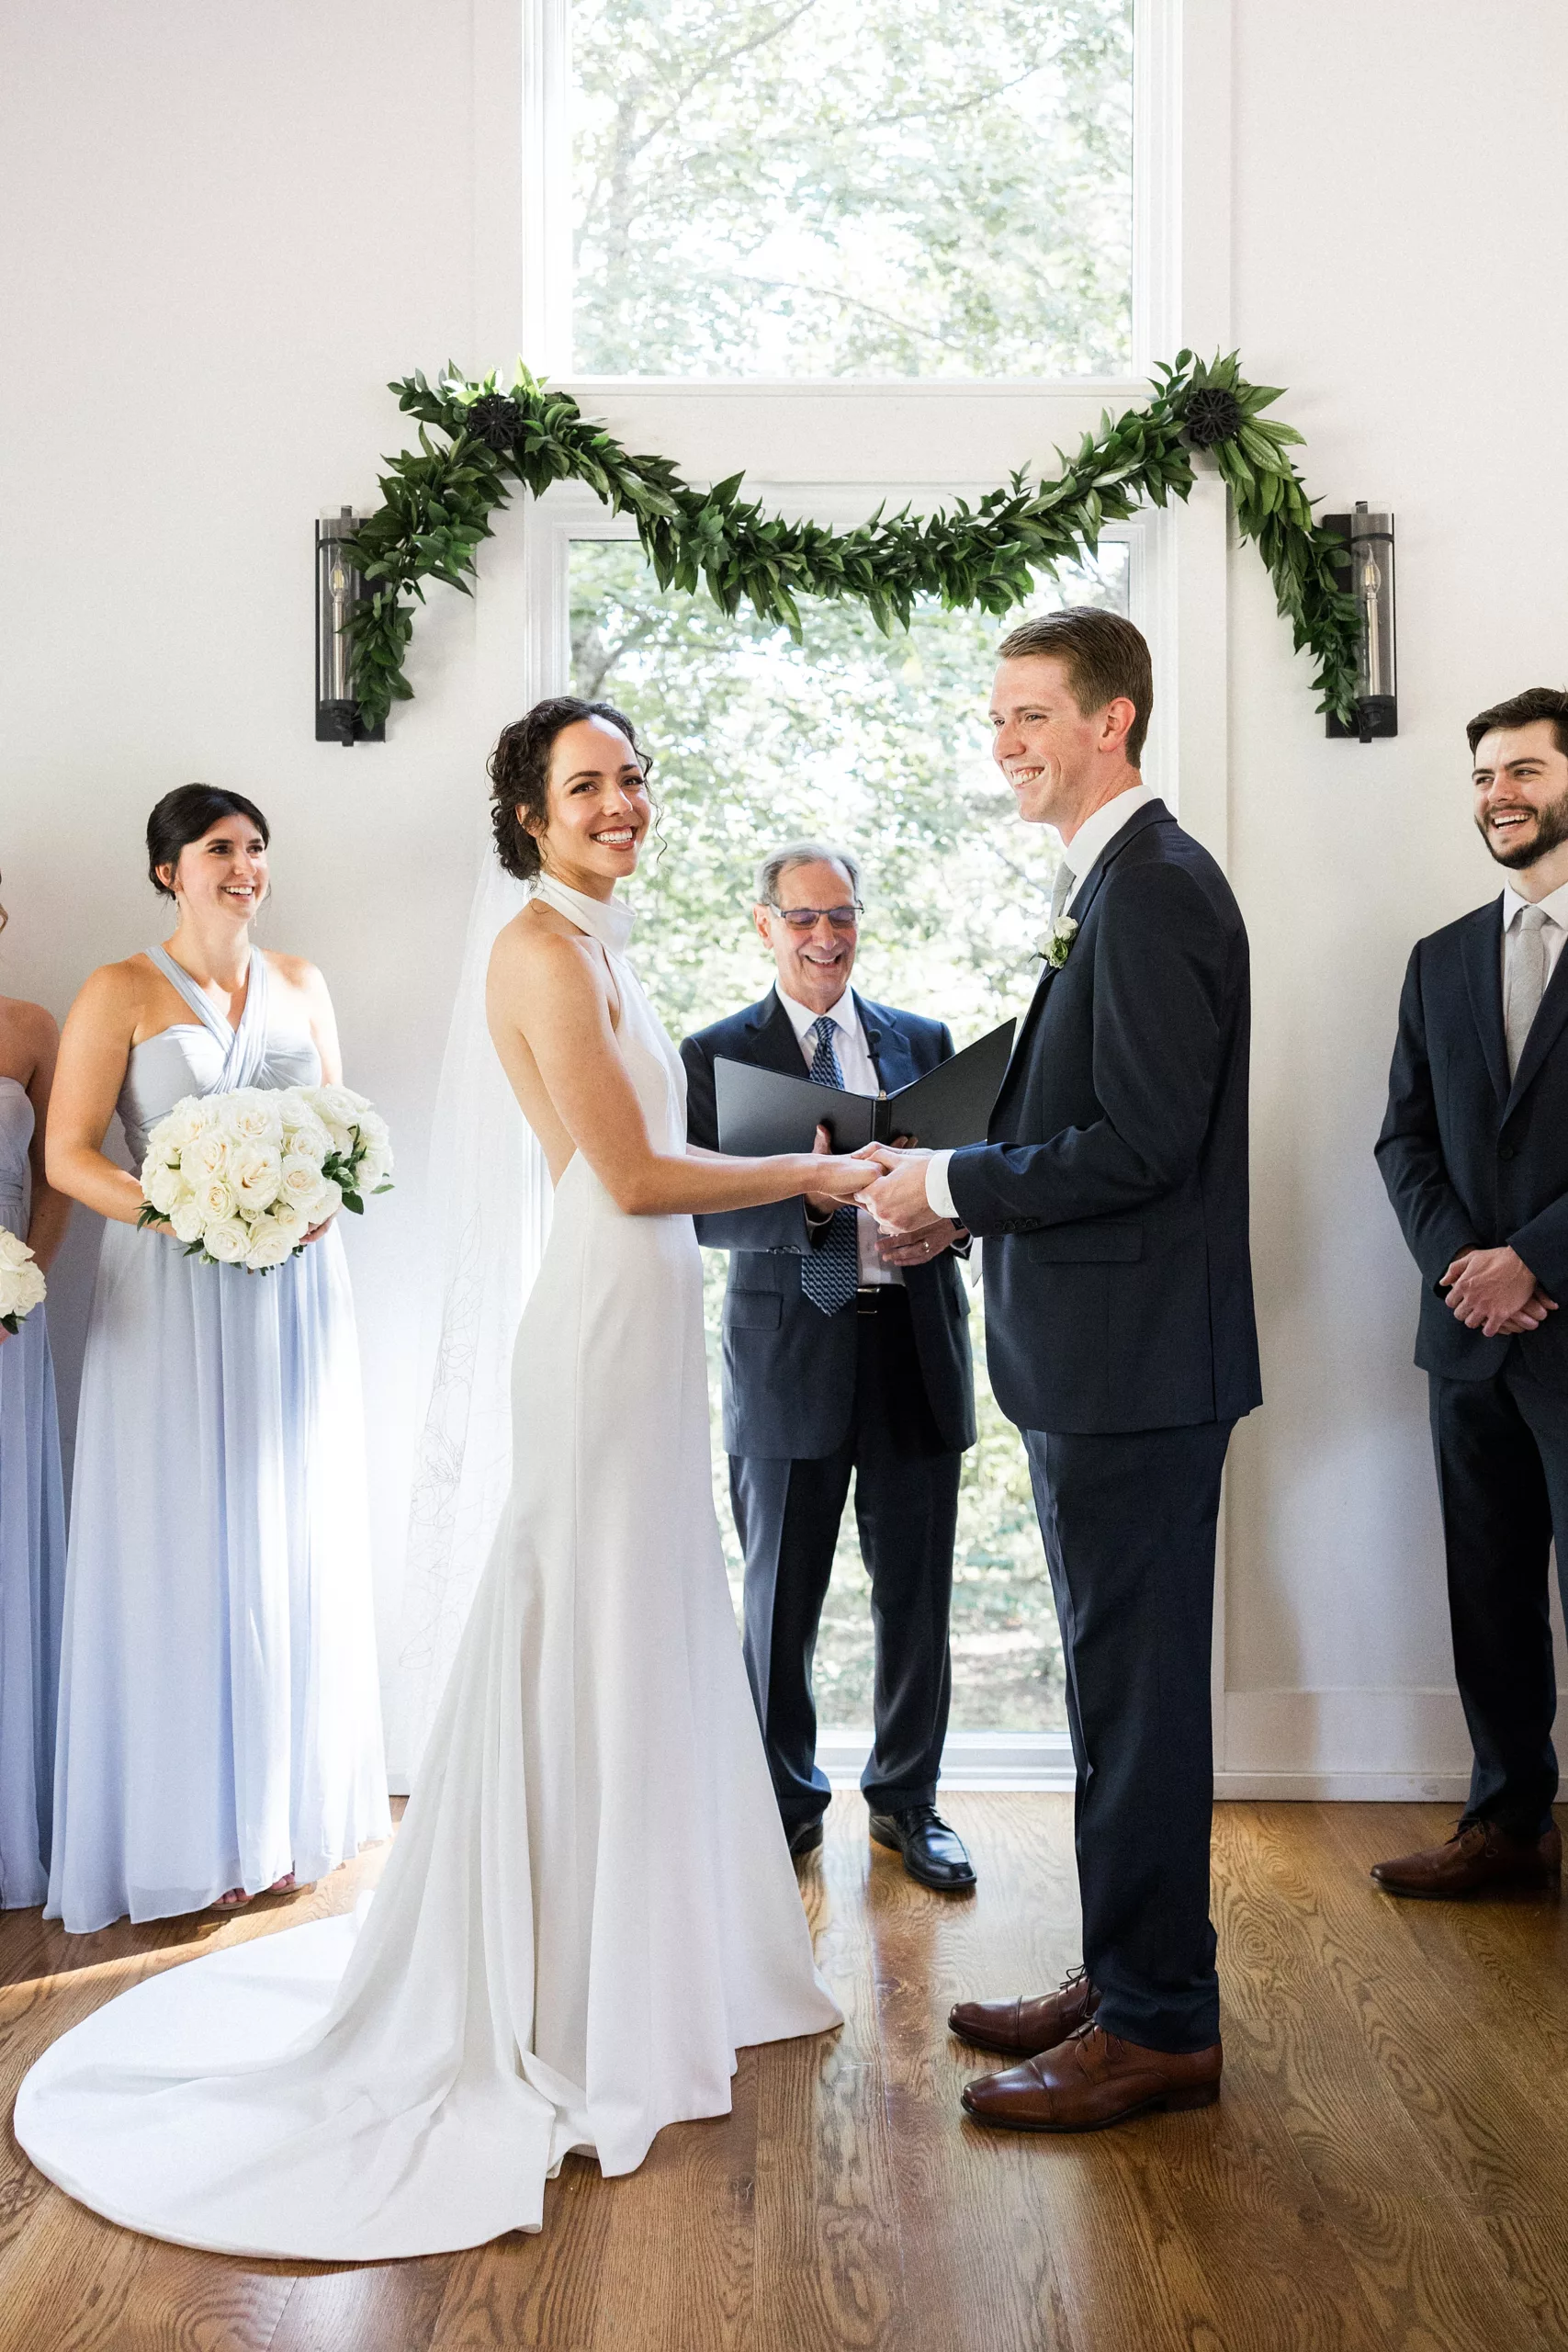 Newlyweds smile and hold hands during their ceremony at Juliette Chapel Wedding